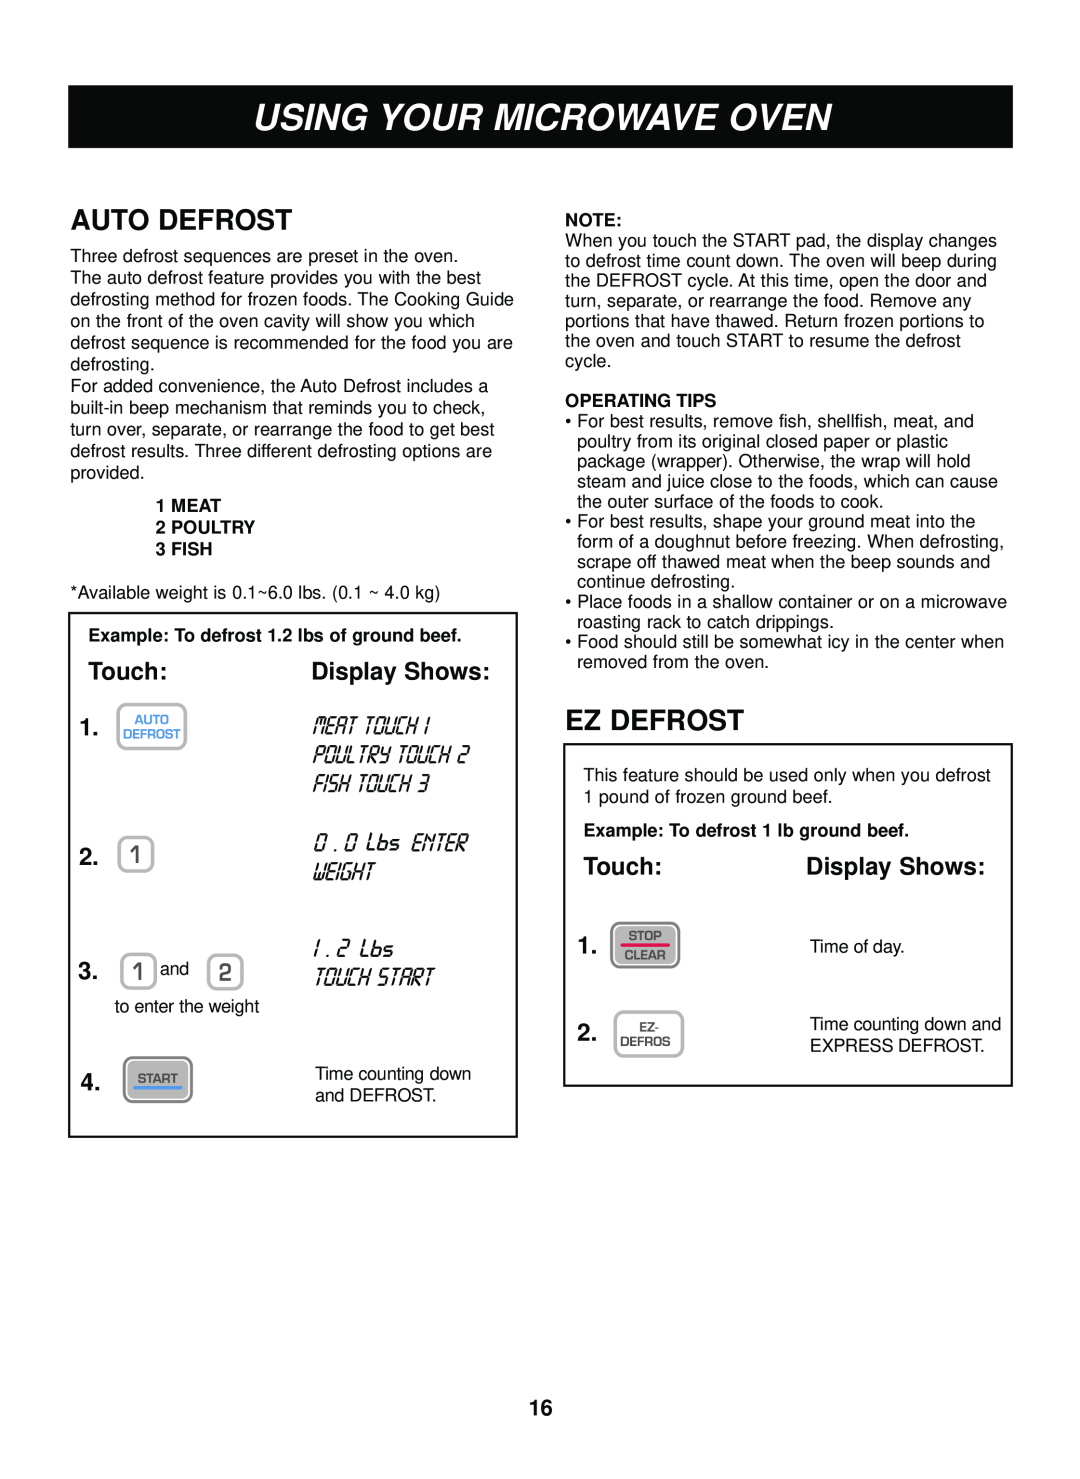 LG Electronics LCRM1240SW manual Auto Defrost, Ez Defrost, Using Your Microwave Oven, Touch, Display Shows 